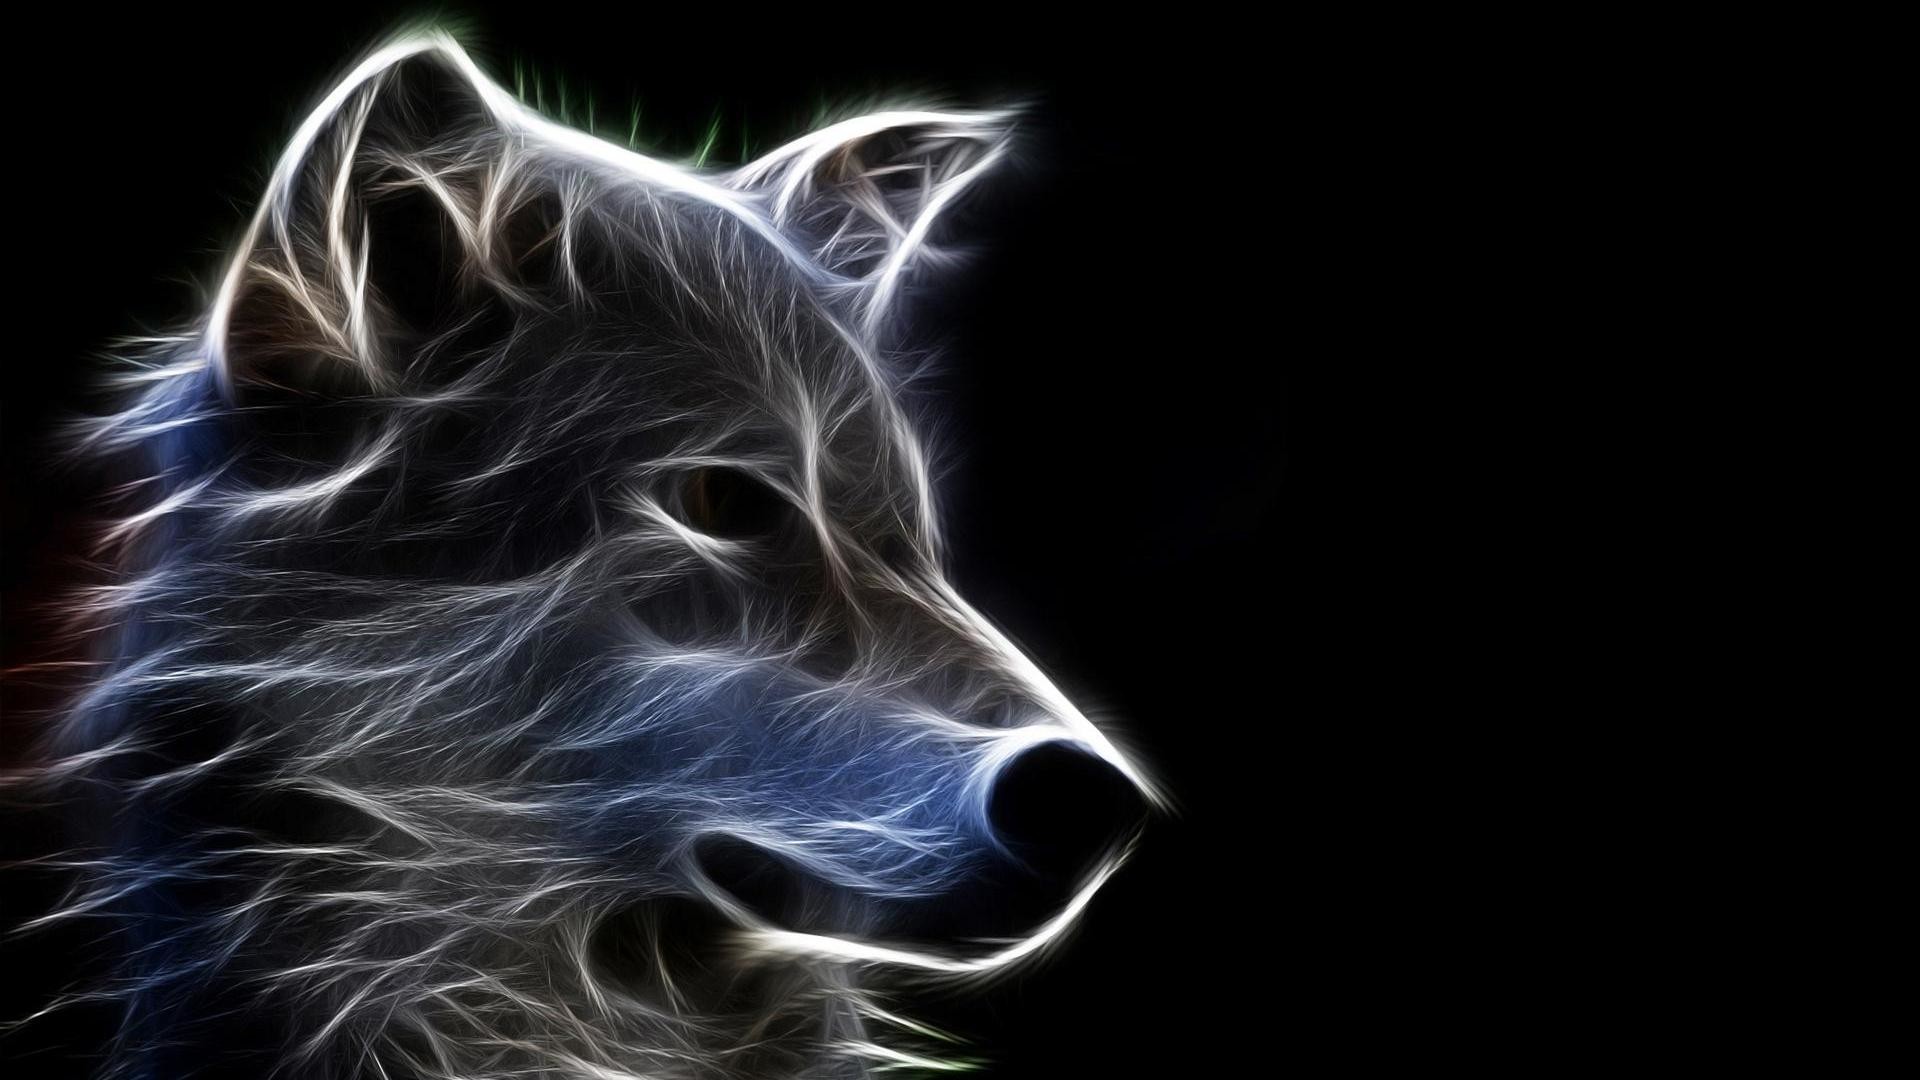 1920x1080 Furry Wallpapers - Viewing Gallery